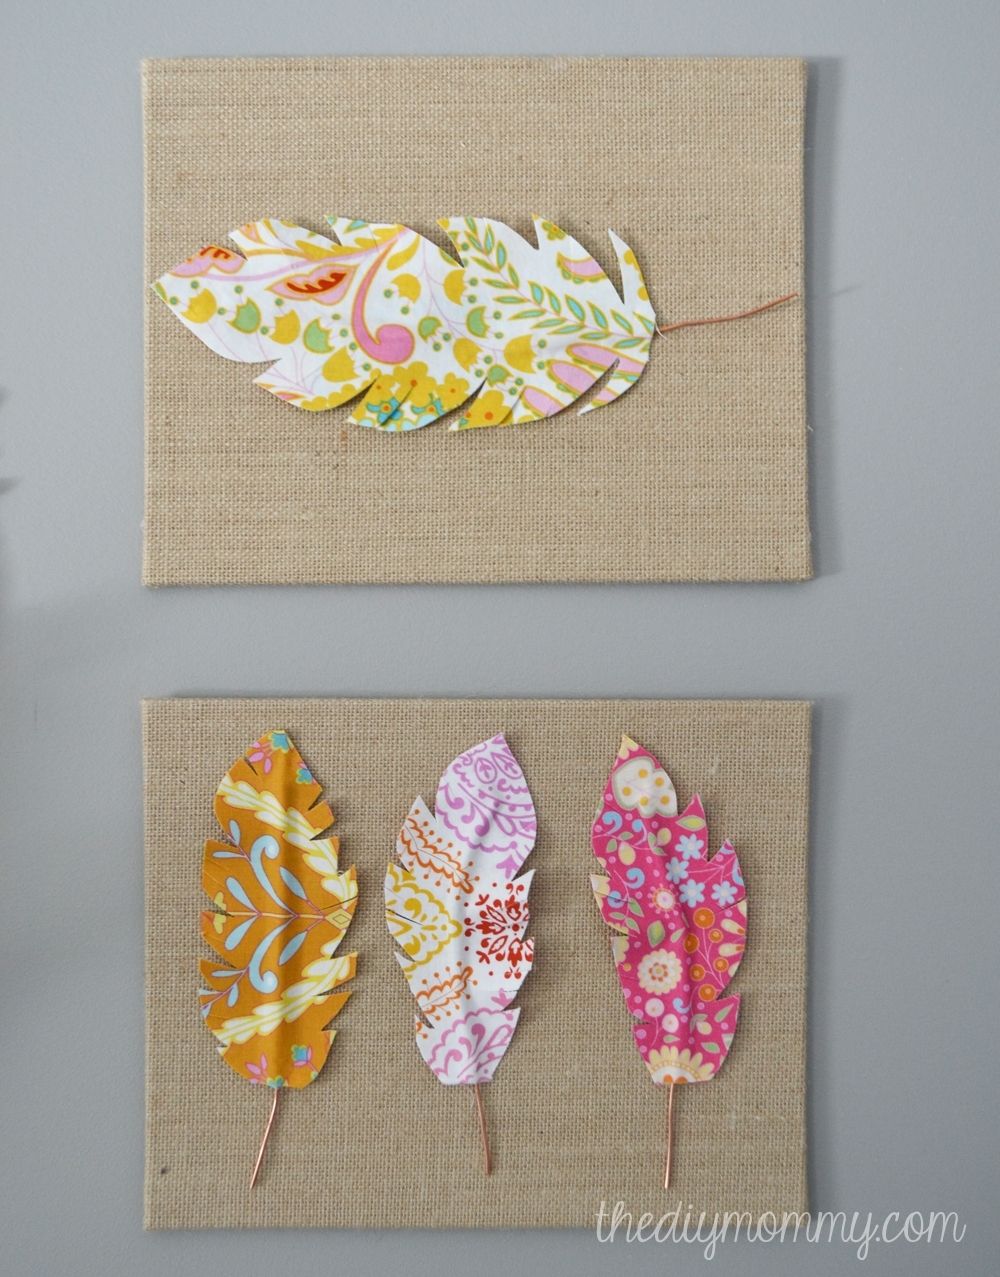 Make Fabric Feather Wall Art | The Diy Mommy Pertaining To Best And Newest Cheap Fabric Wall Art (View 14 of 15)